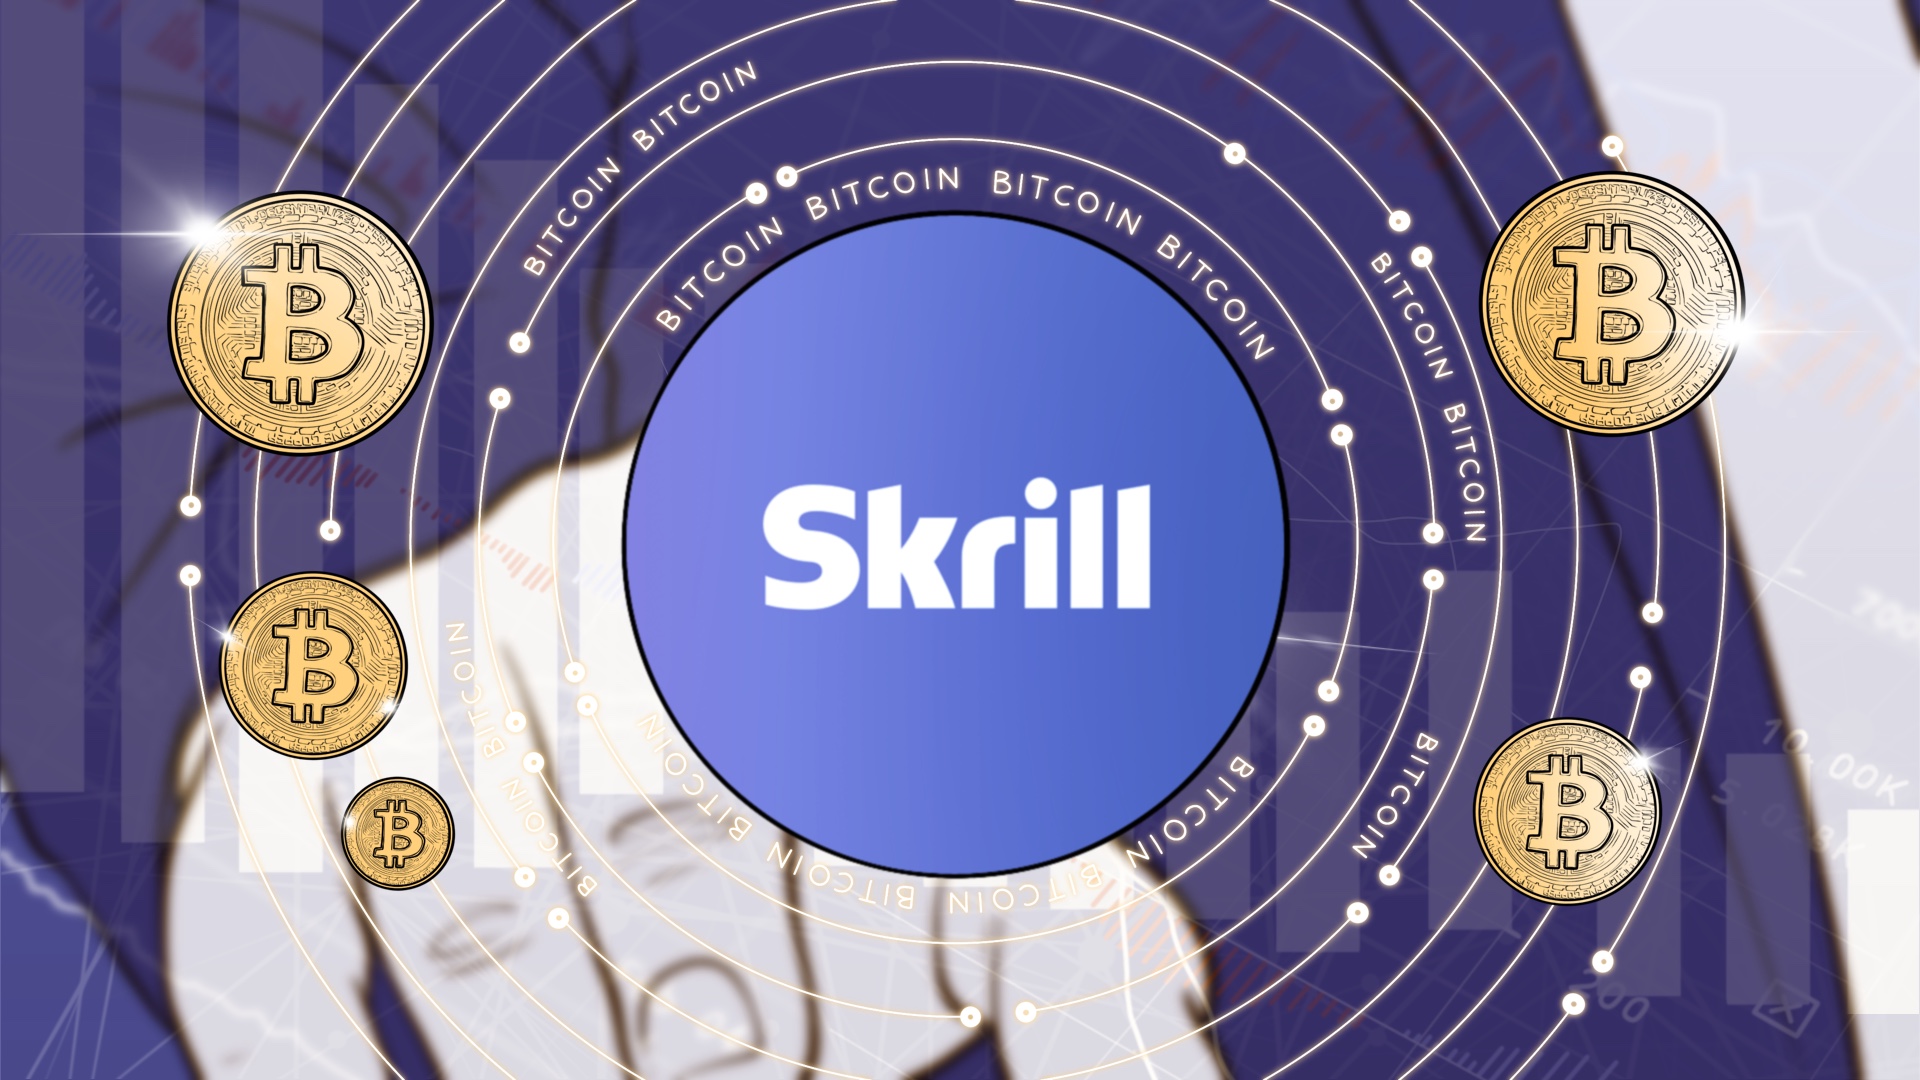 Buy Bitcoins With Skrill The Easy Way